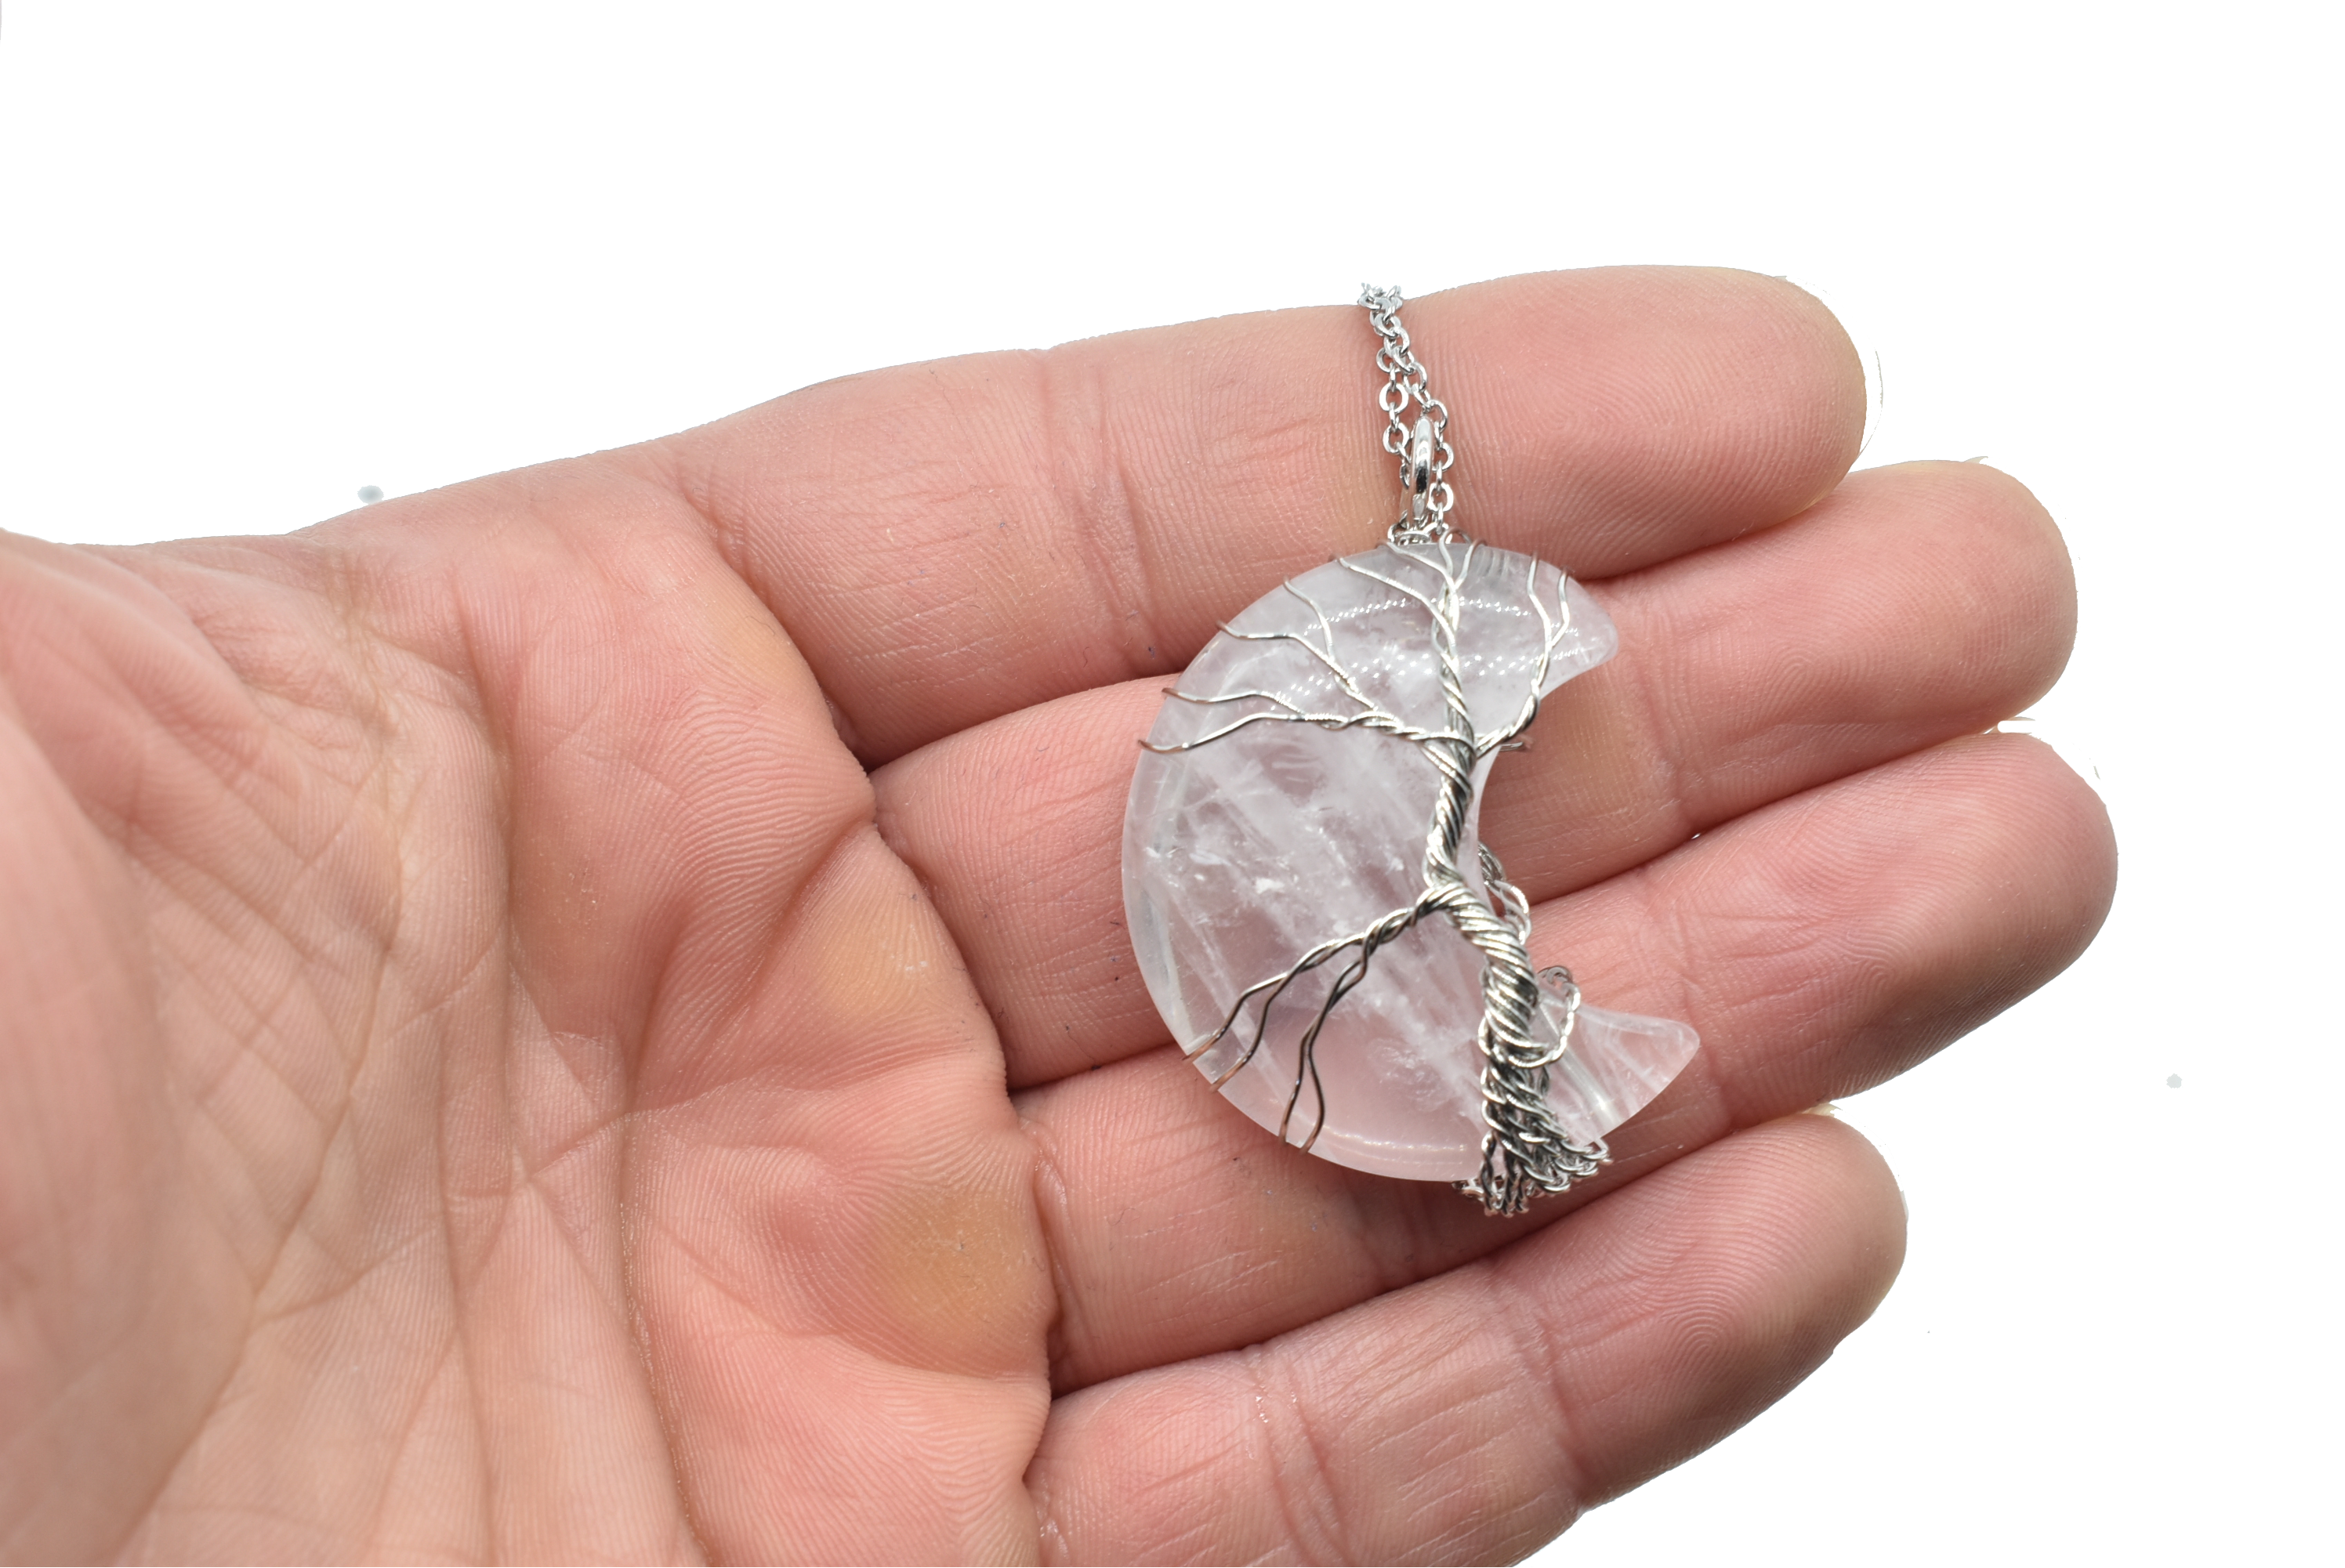 Hyaline Quartz Moon Pendant wrapped in silver-colored thread